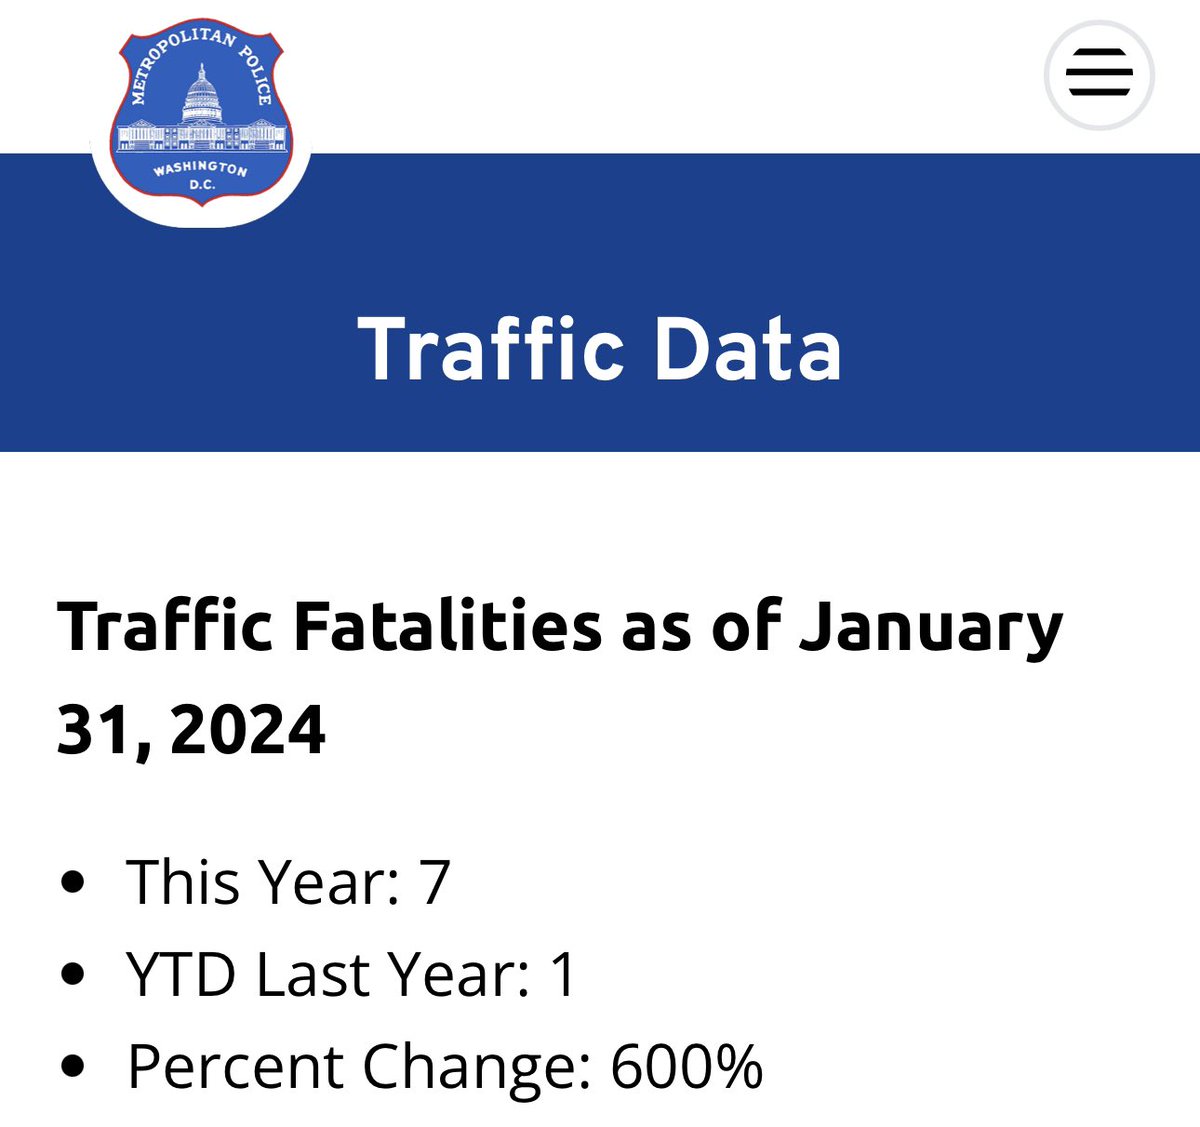 7 traffic fatalities in the District during the first month of 2024, a *600% increase* relative to January 2023! #ZeroVision